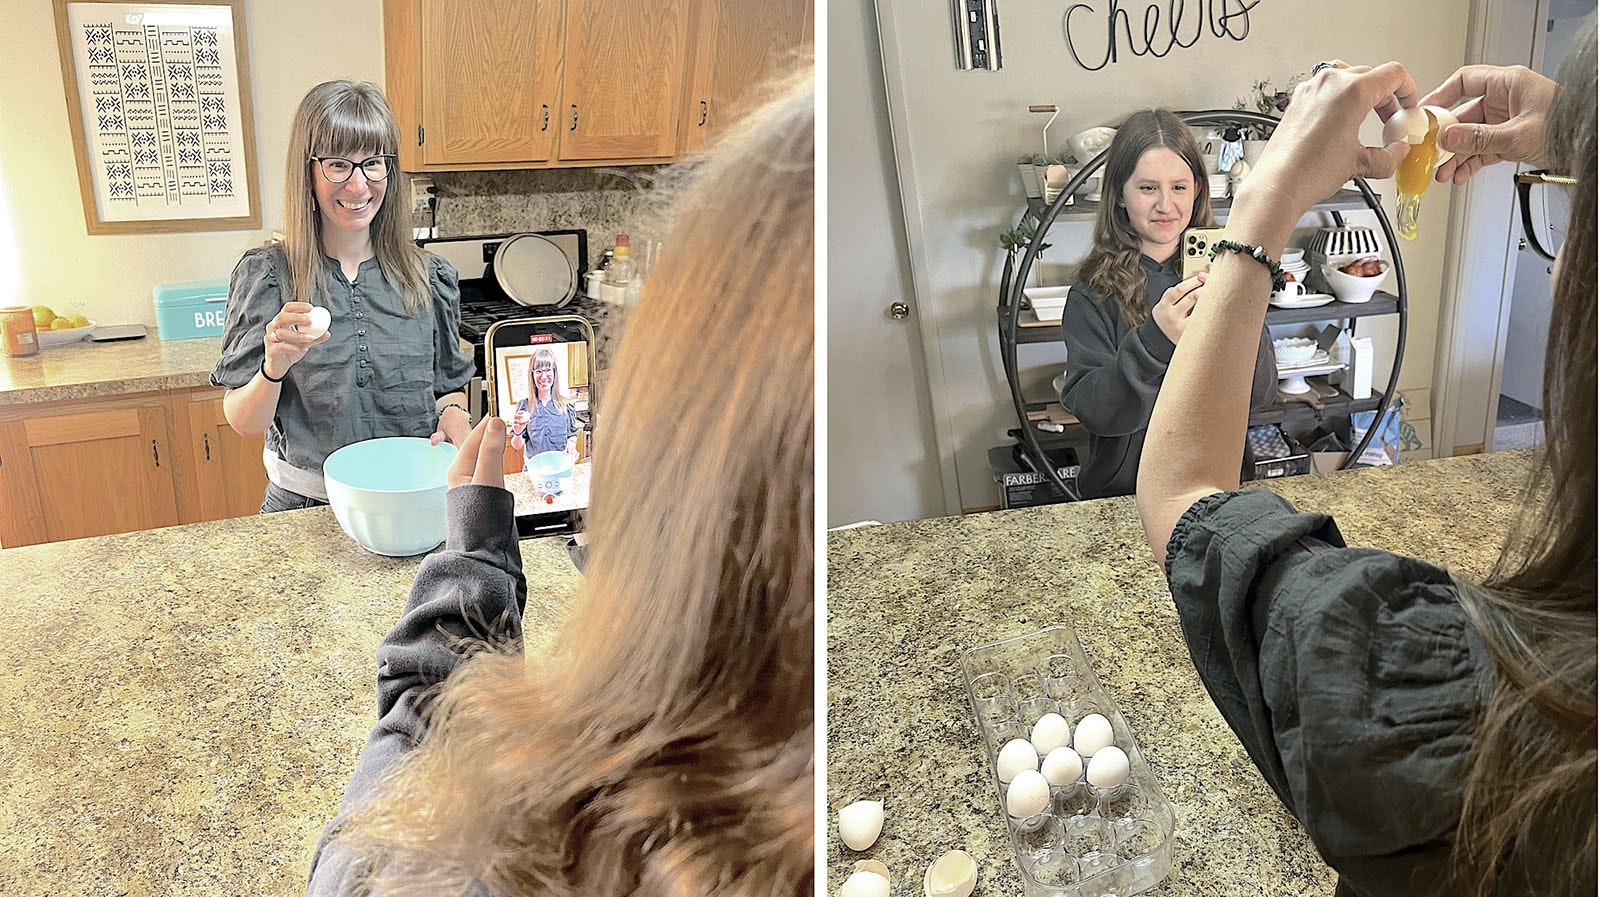 With help from her daughter Macy, Megan Reid has become a TikTok sensation from her own kitchen.